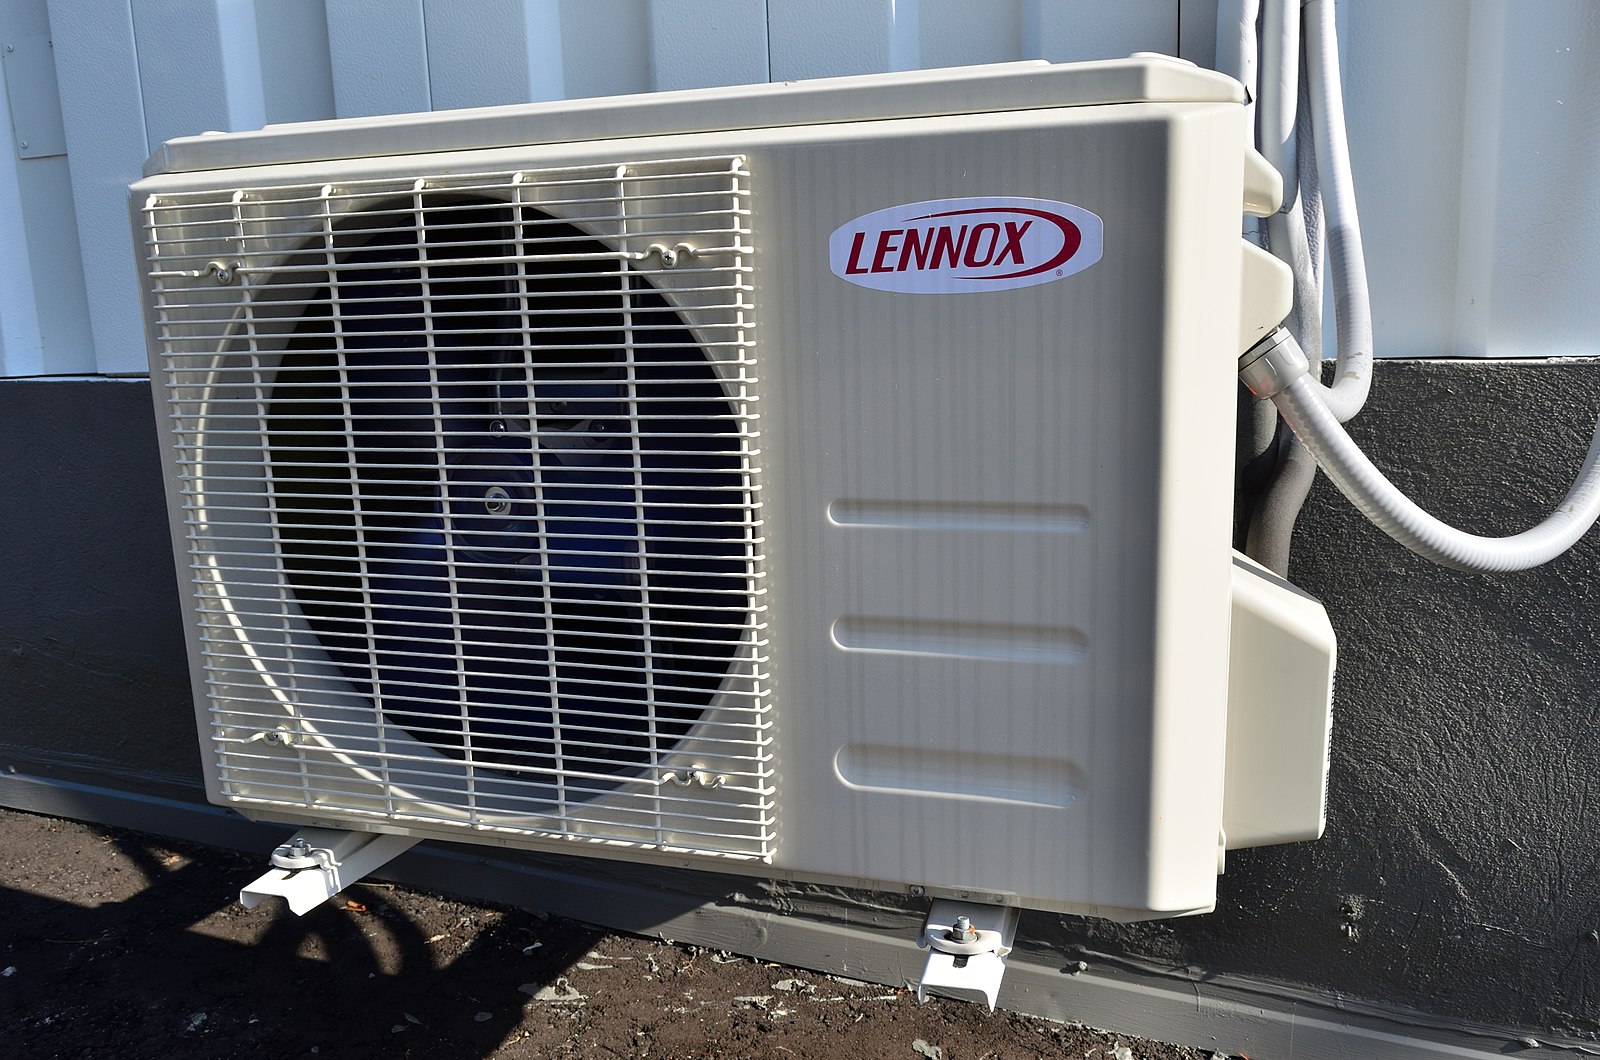 how to put Lennox  into test mode